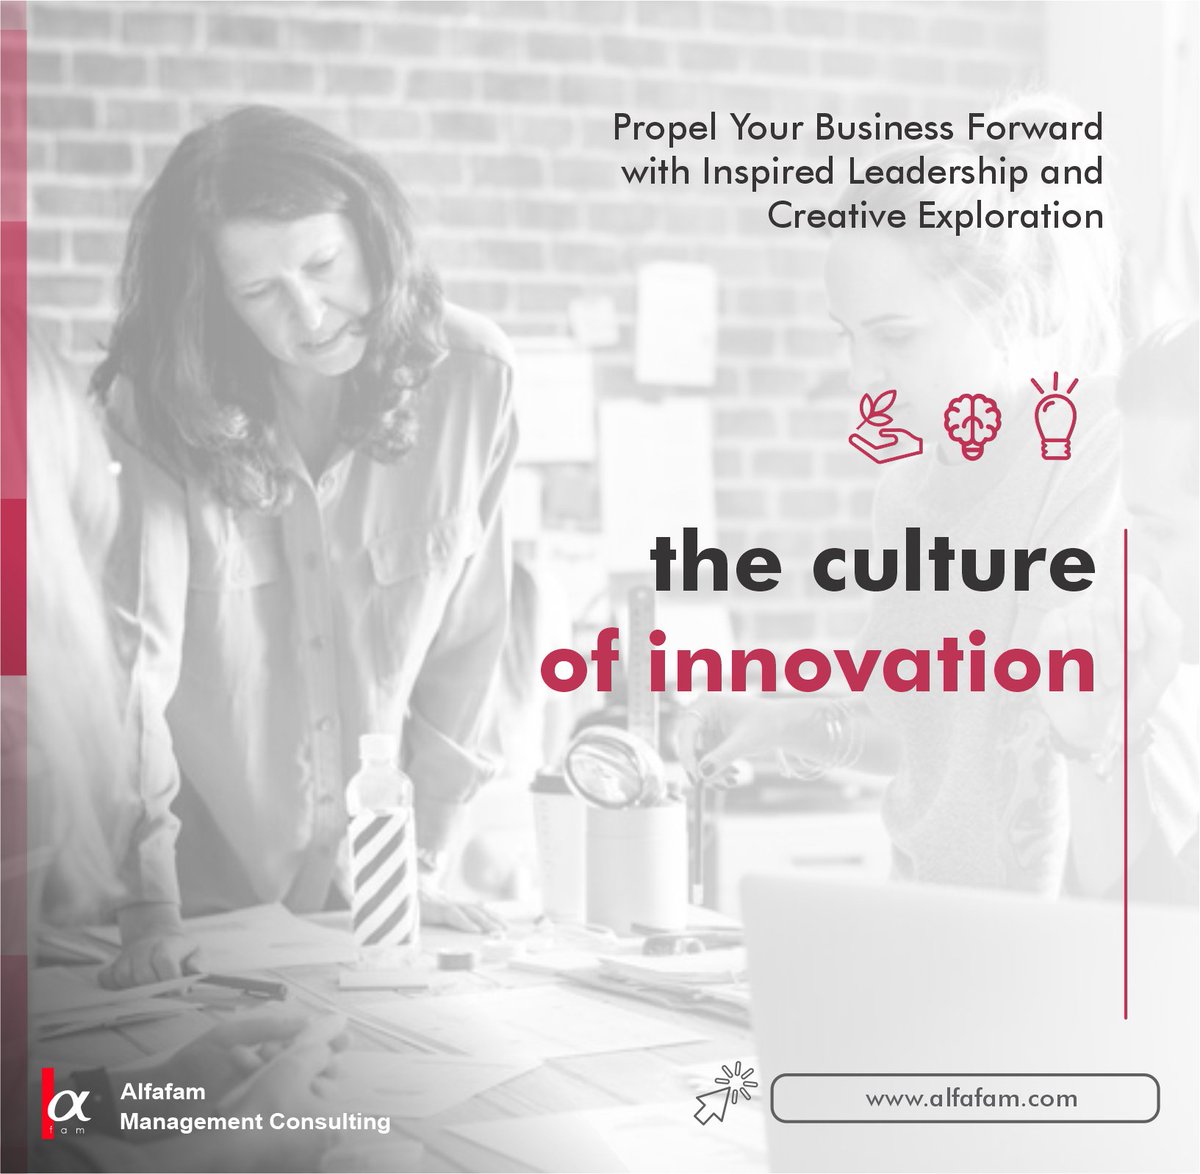 Cultivating a culture of creativity is crucial for staying ahead in business. As leaders, we can foster an environment where groundbreaking ideas thrive. #InnovationCulture #CreativeLeadership #managementconsulting